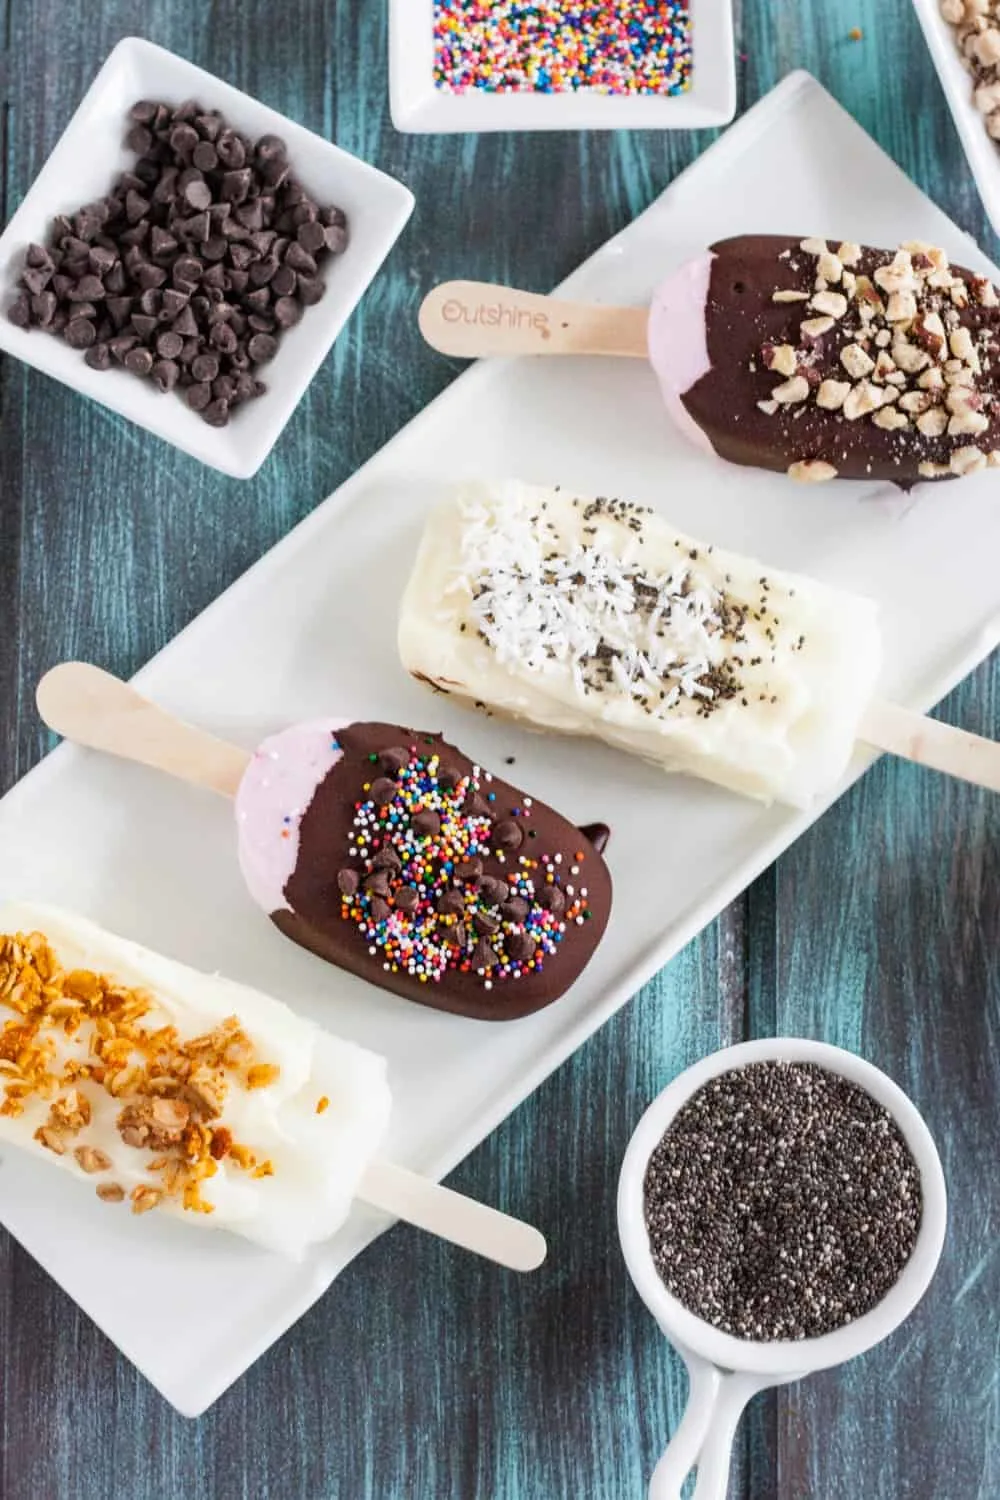 Set up a chocolate dipping station for fruit pops at your next summer party! It's an easy and interactive dessert your guests will love! #ad #SnackBrighter